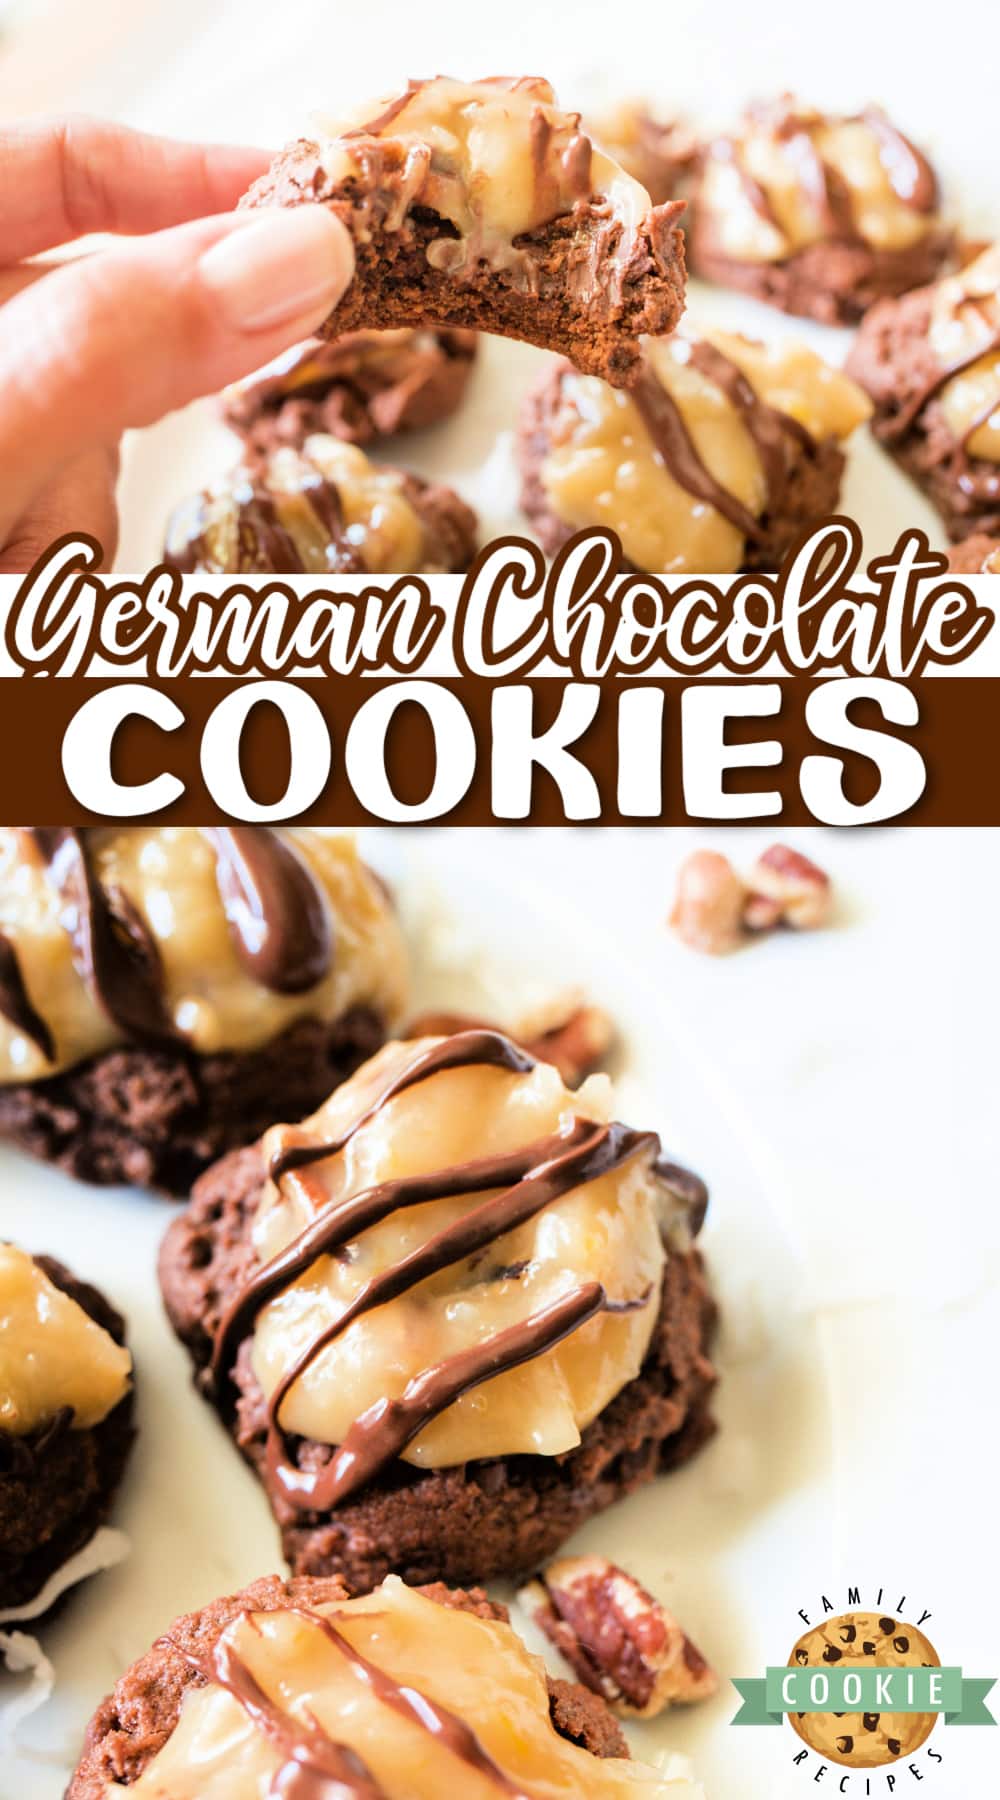 German Chocolate Cookies made from scratch with a double chocolate cookie that is topped with a creamy coconut pecan topping and a chocolate drizzle. 